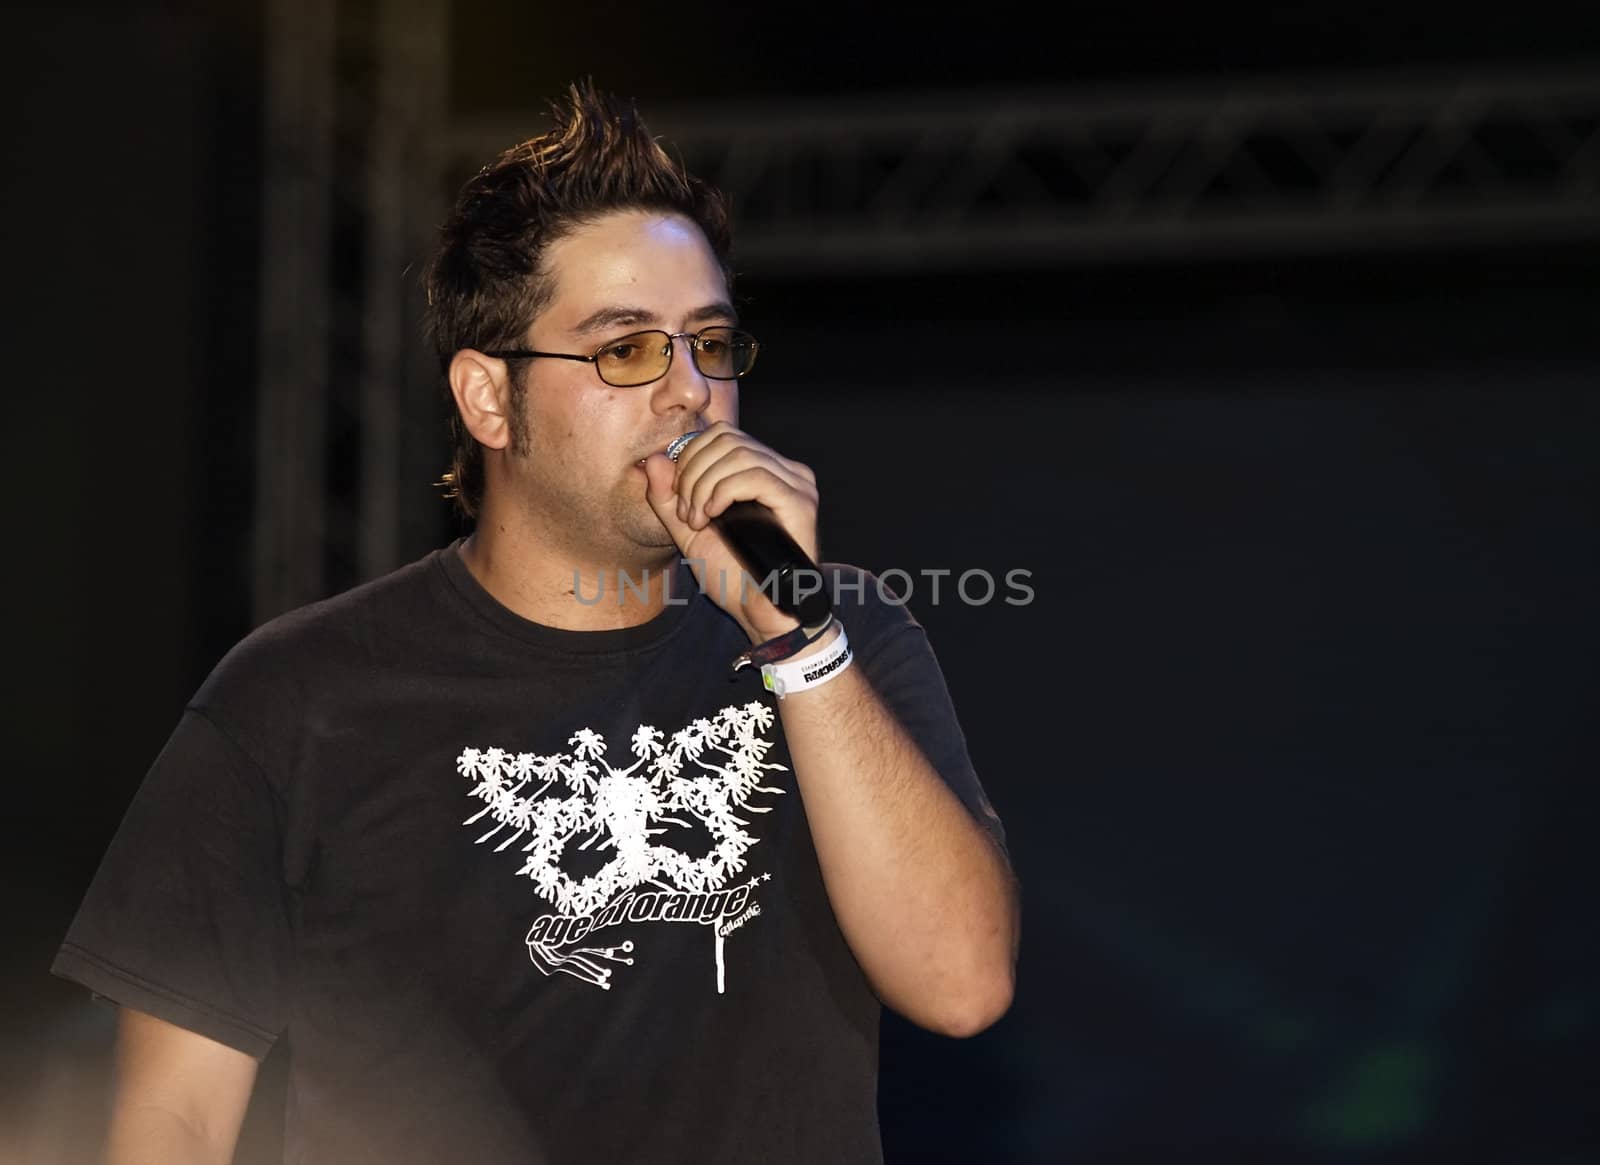 VALLETTA, MALTA - AUG 29 - Nick Morales performing during the Michael Jackson Tribute Concert organised by Xfm radio station at The Valletta Waterfront 29th August 2009